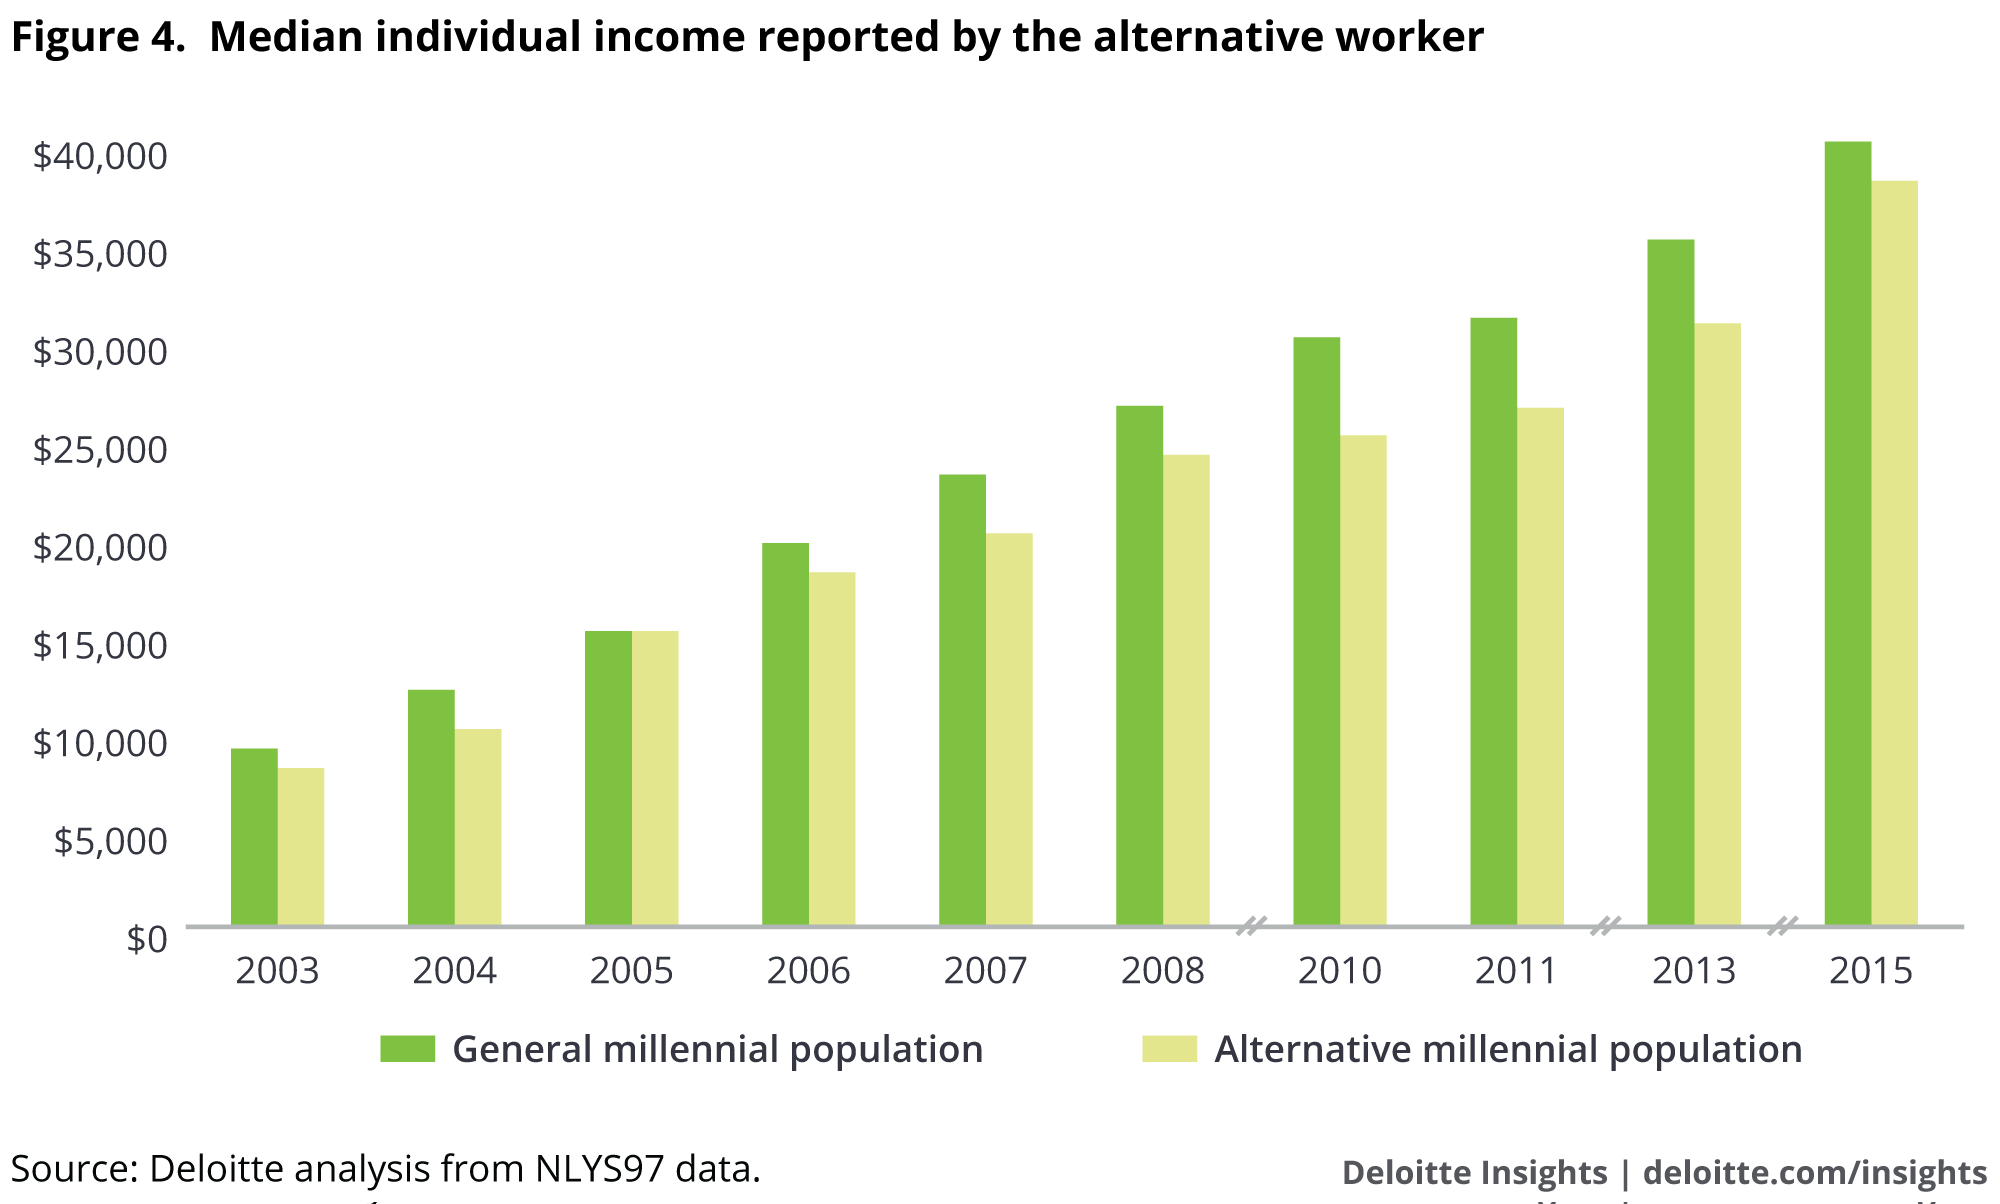 Median individual income reported by the alternative worker